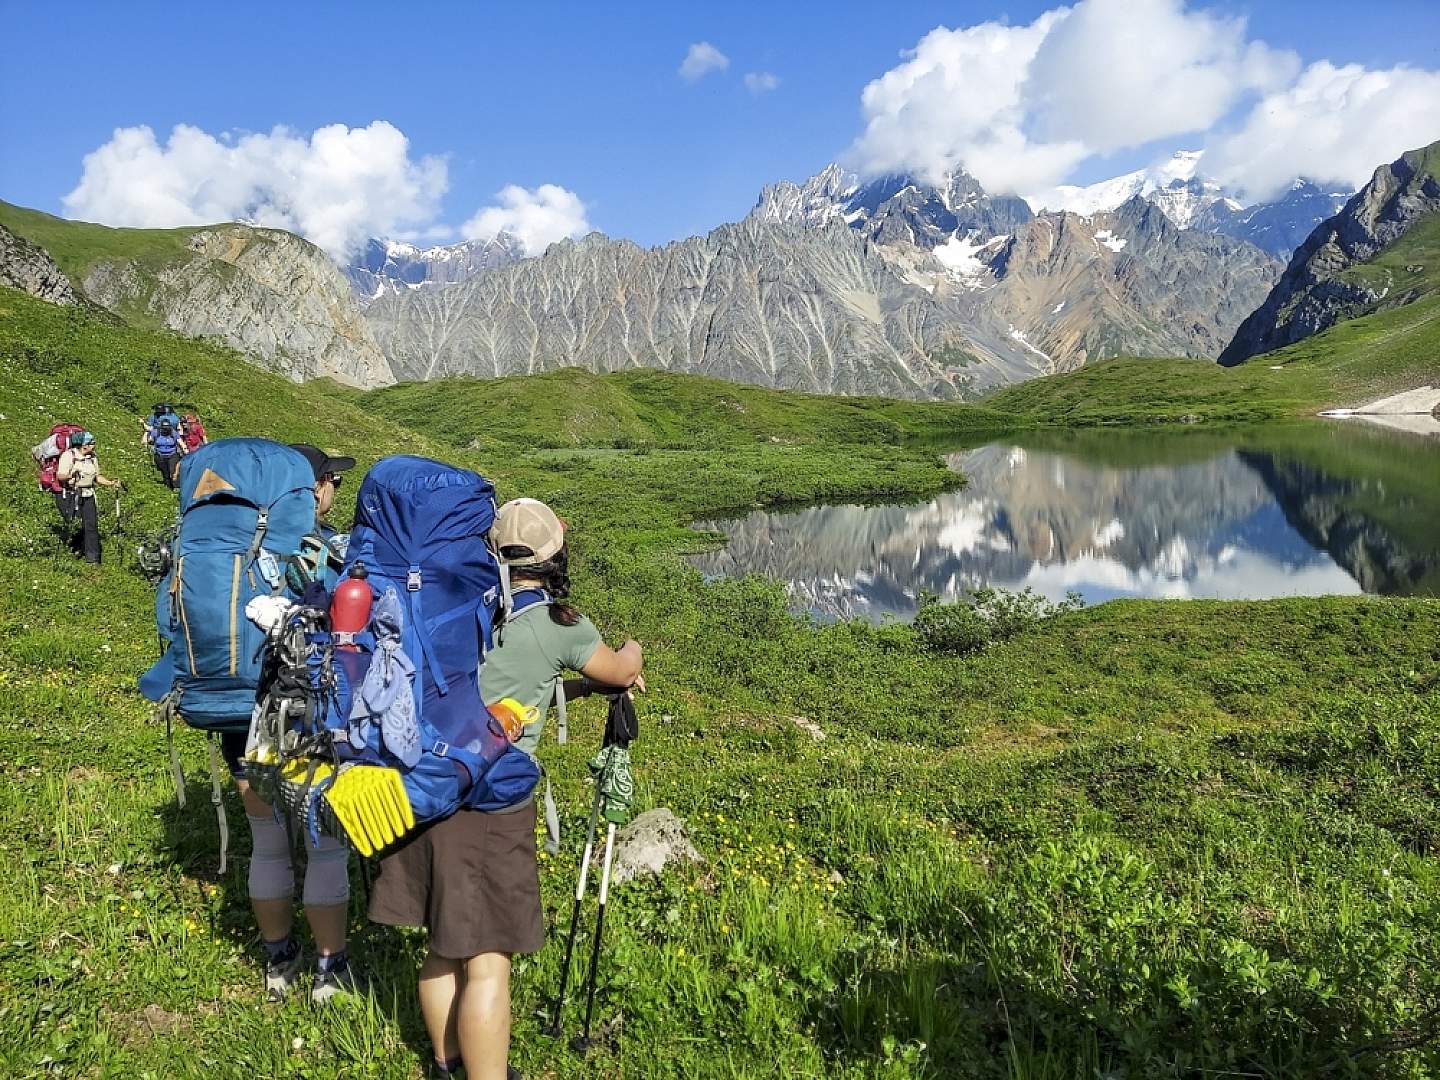 Backpacking excursions for beginners or experienced backpackers that match your abilities